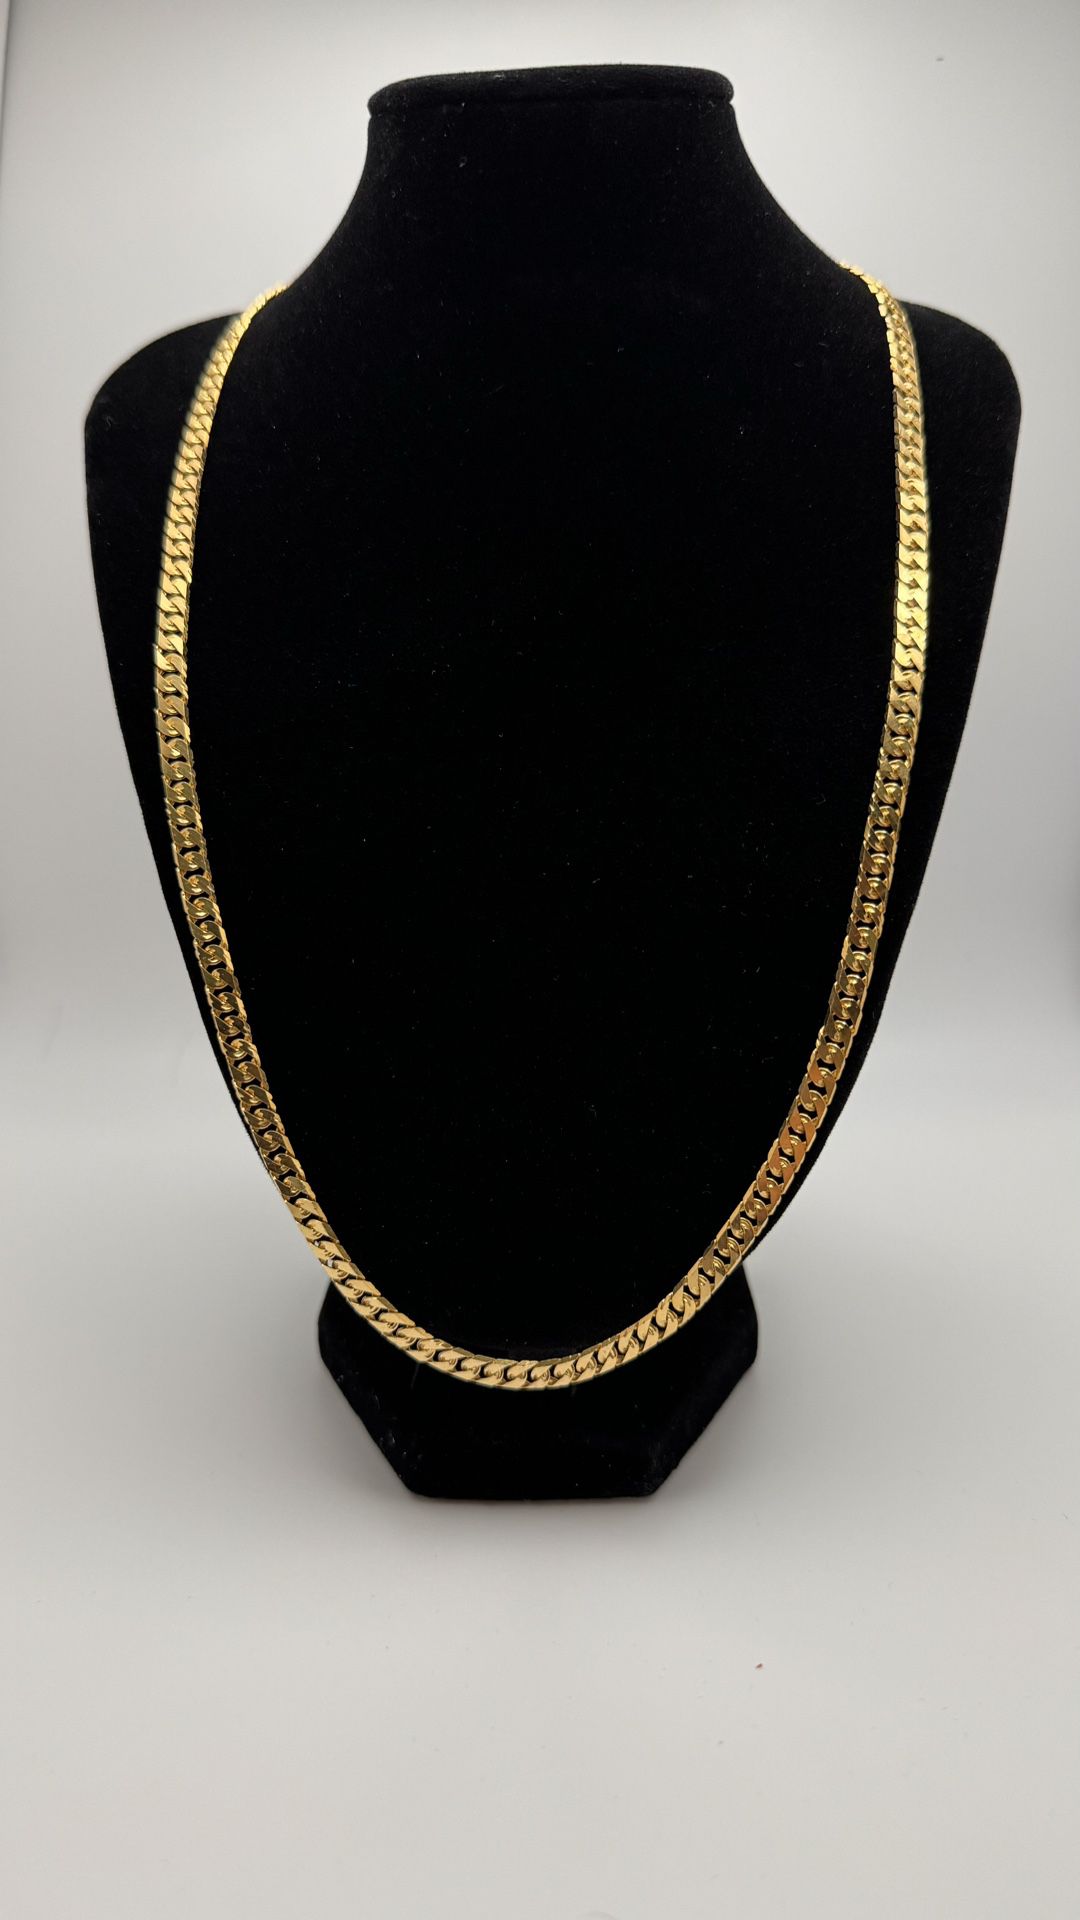 Solid Gold Chain 20" 14kt